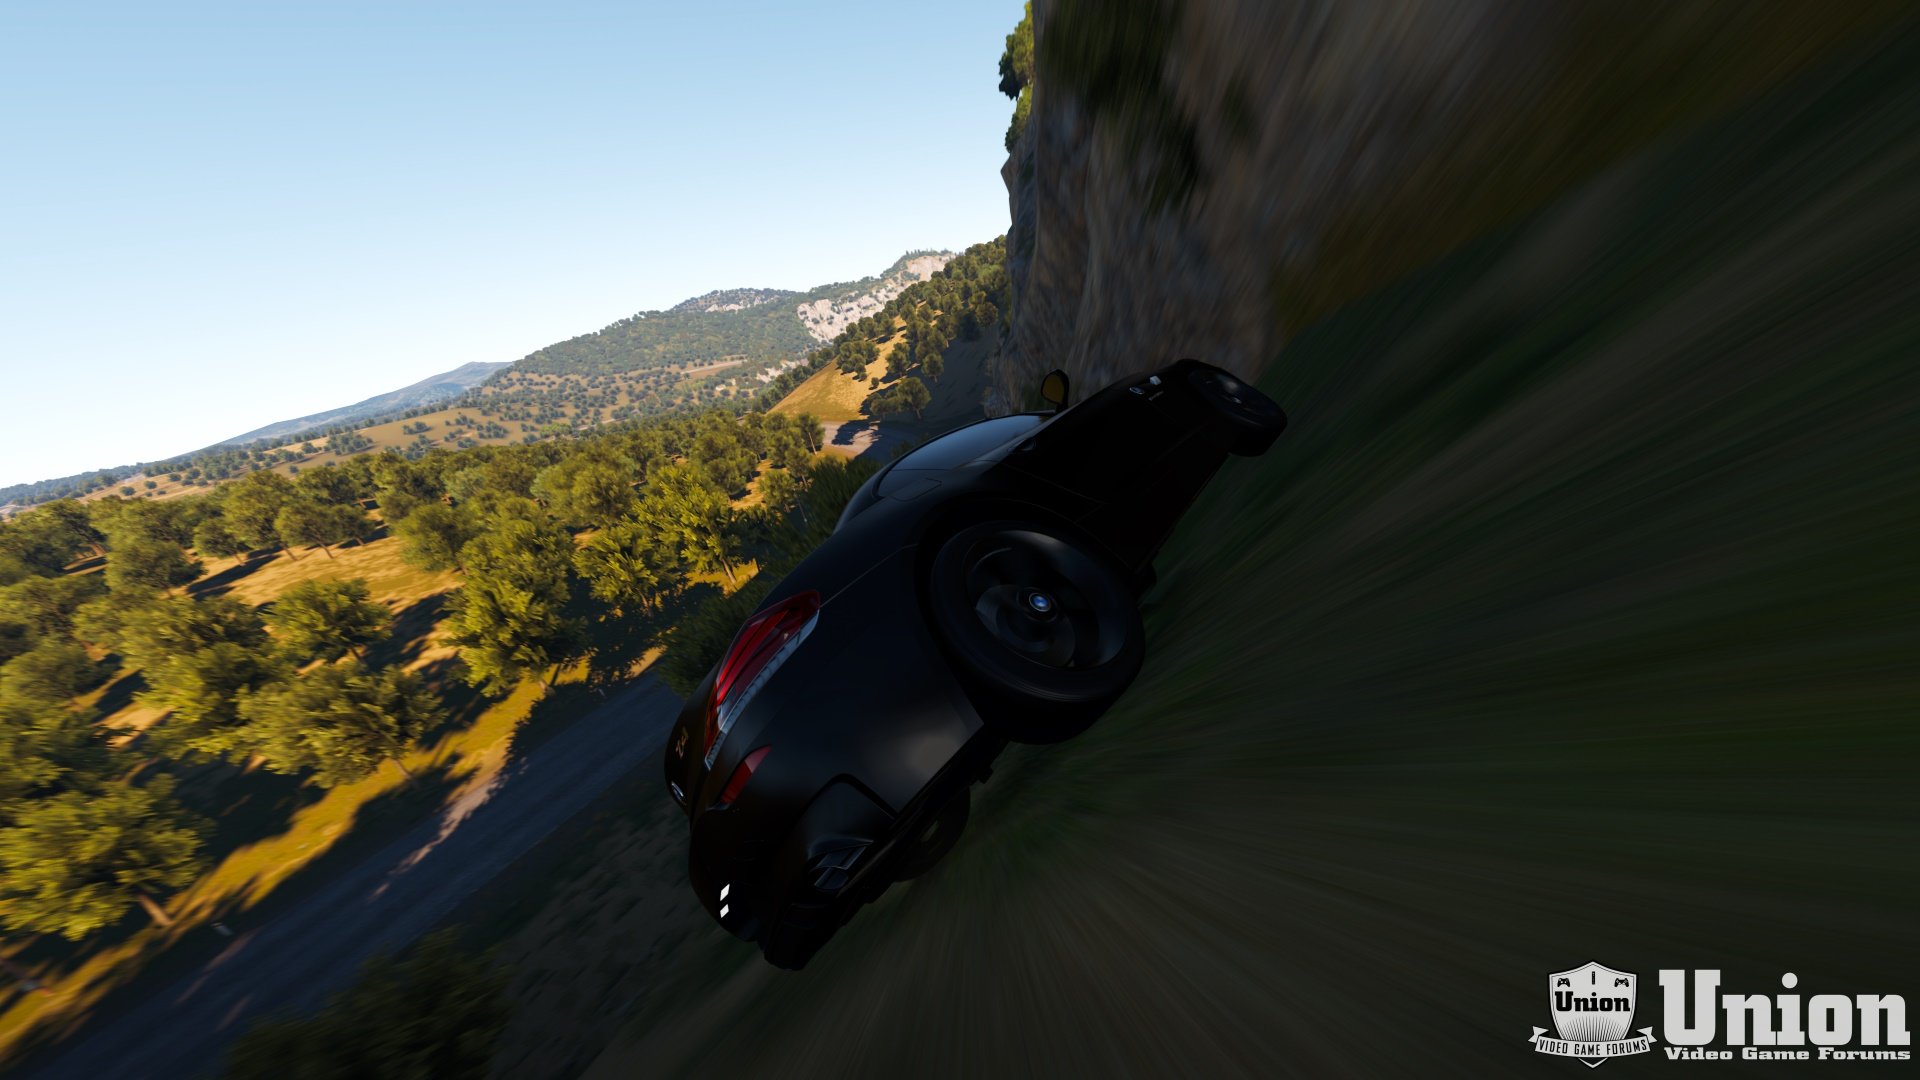 Falling off a cliff.